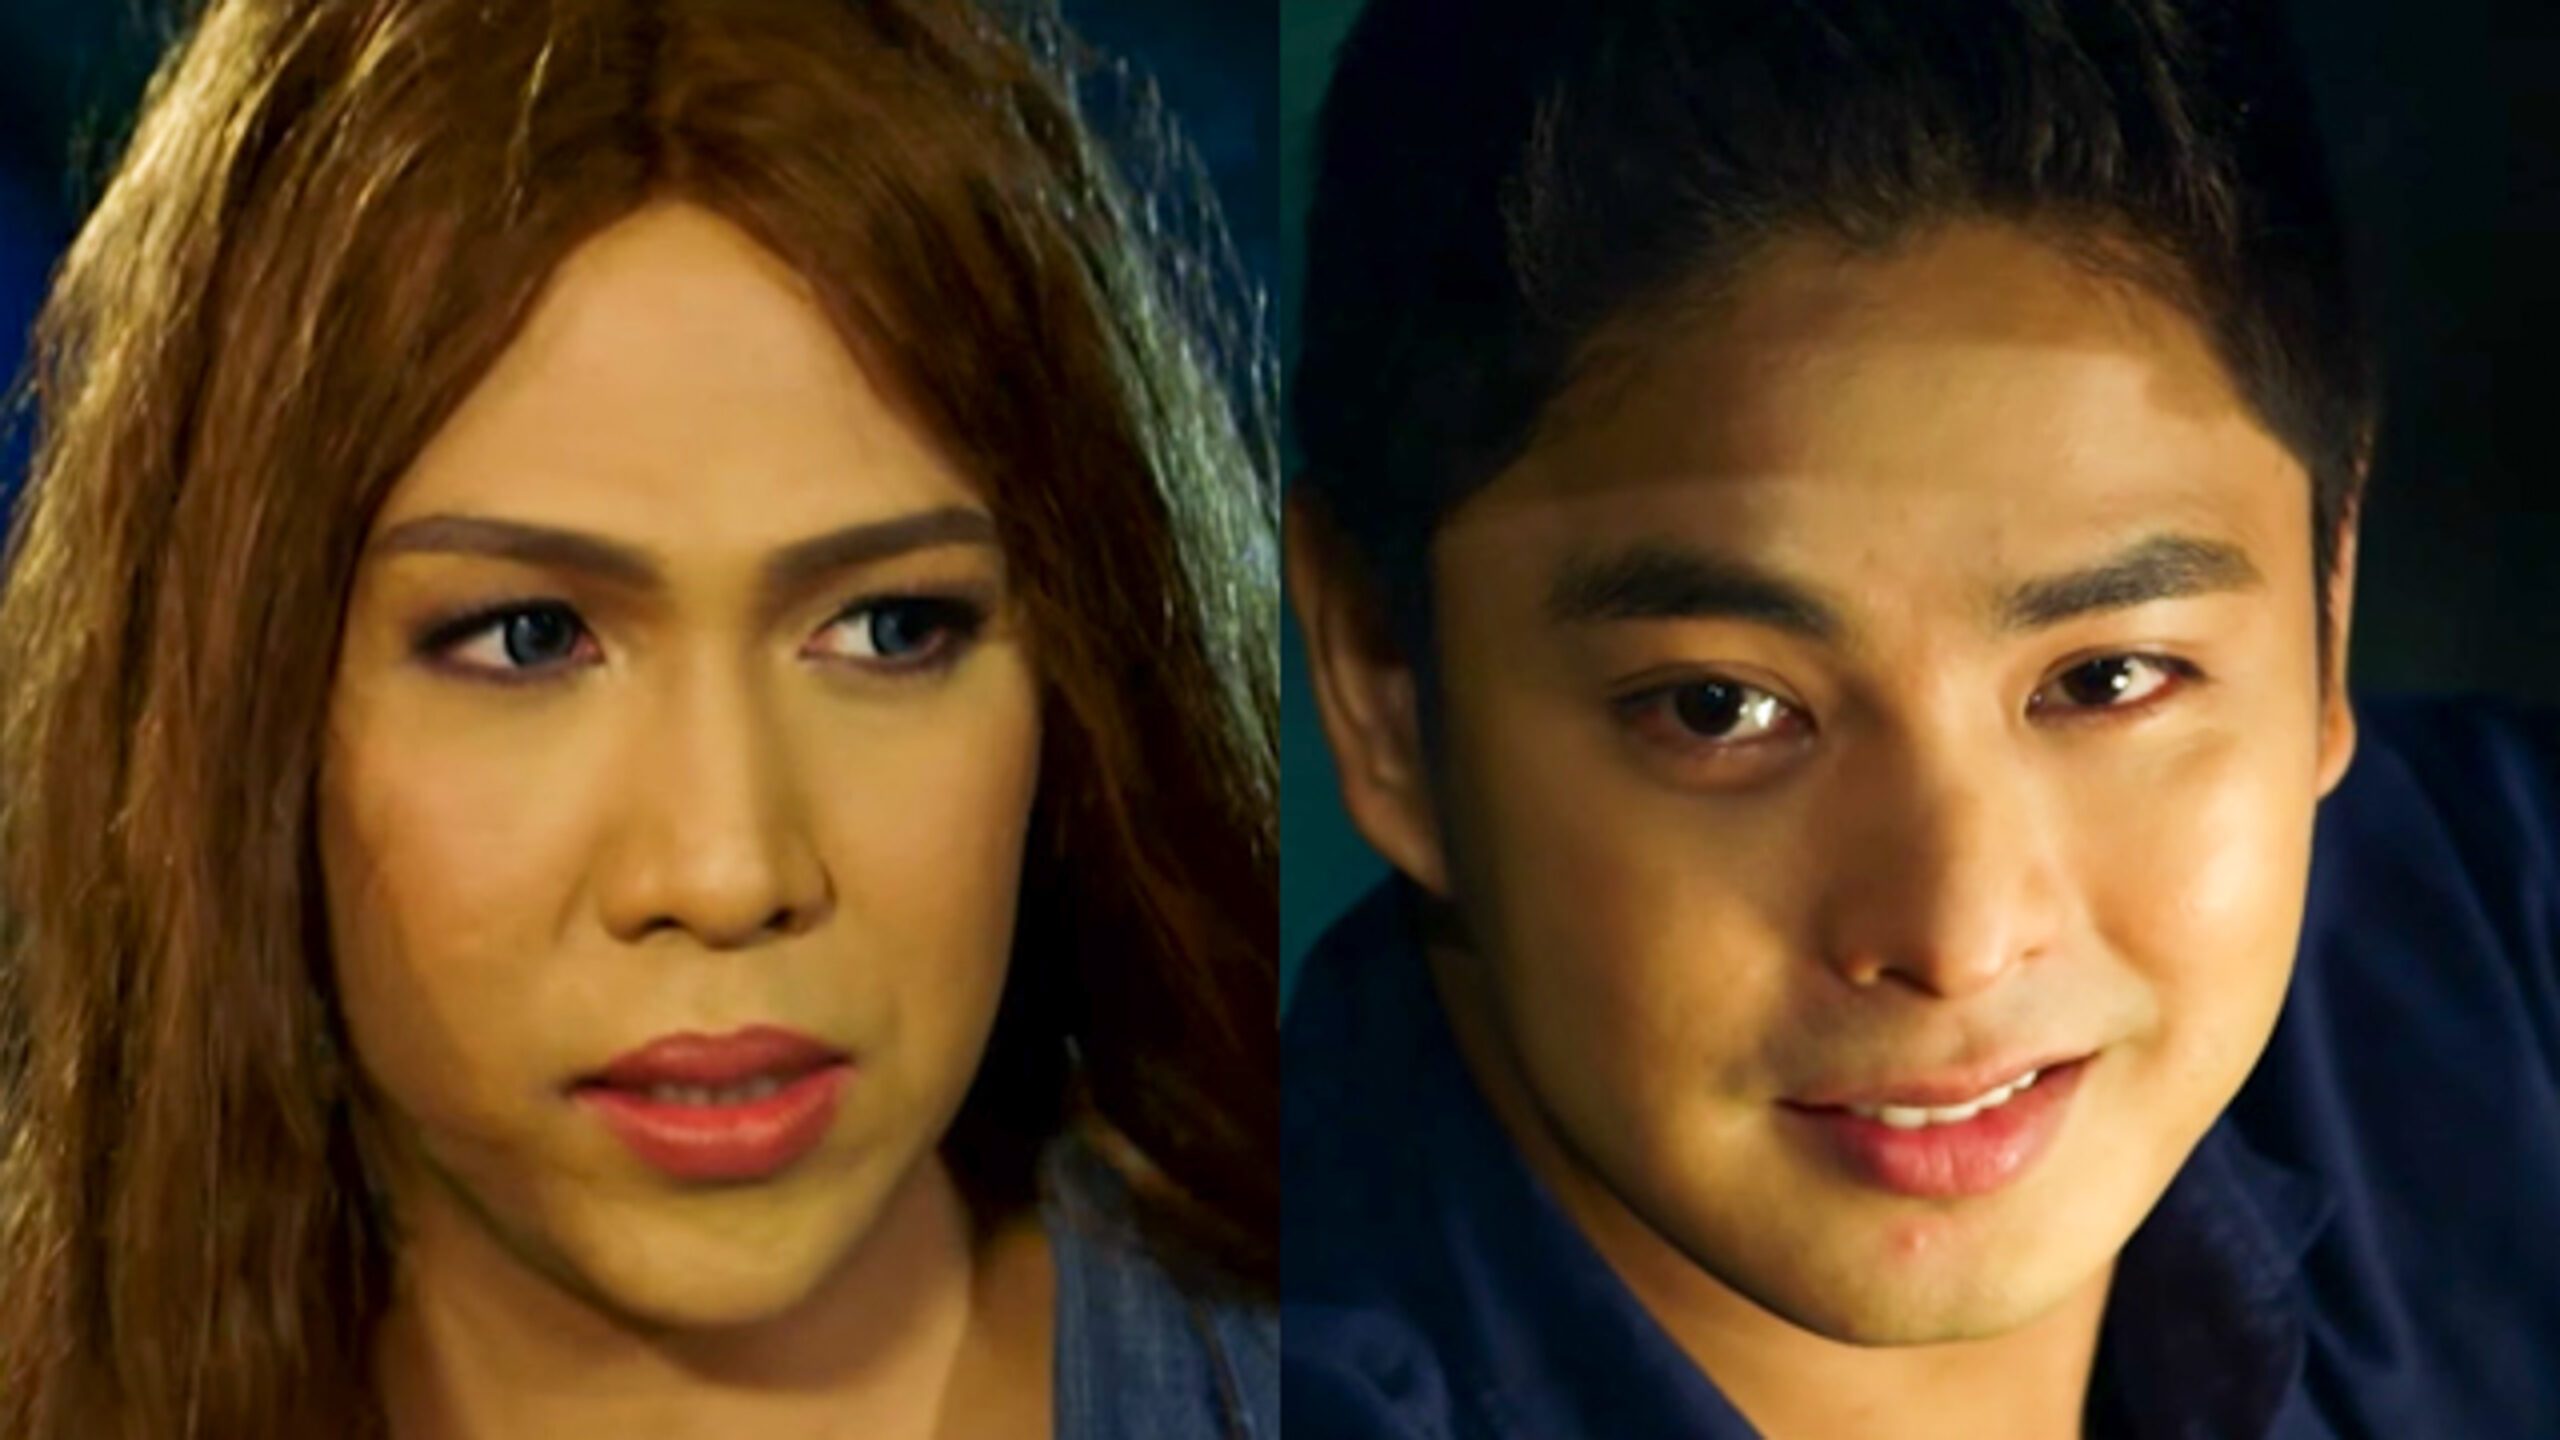 MTRCB meets with ‘Ang Probinsyano’ producers over ‘sexually suggestive’ scene